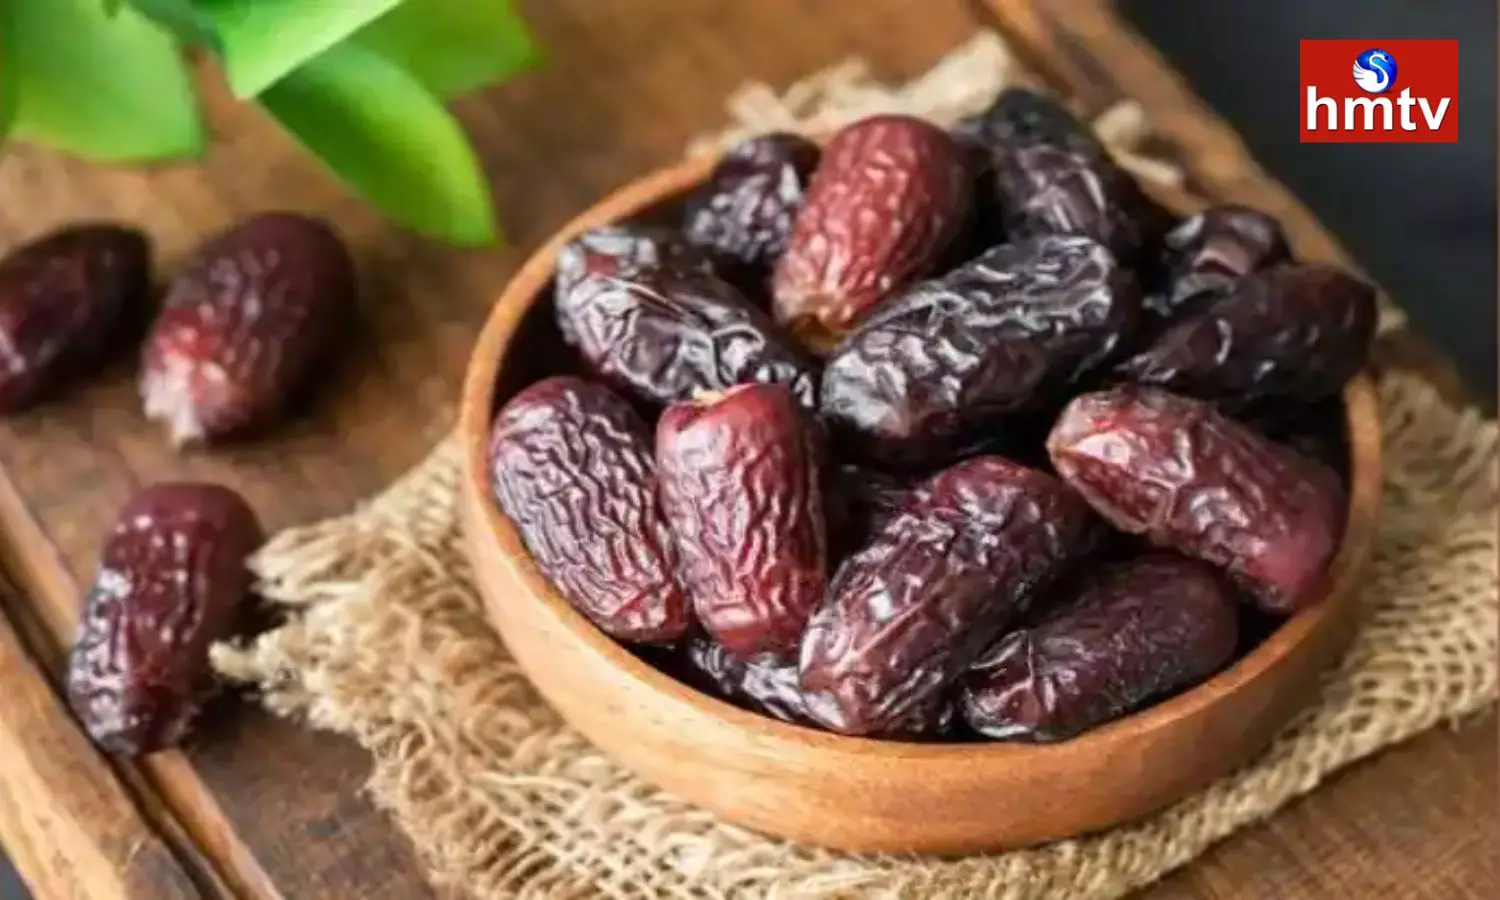 Eat dates for longevity reduces risk of fatal diseases